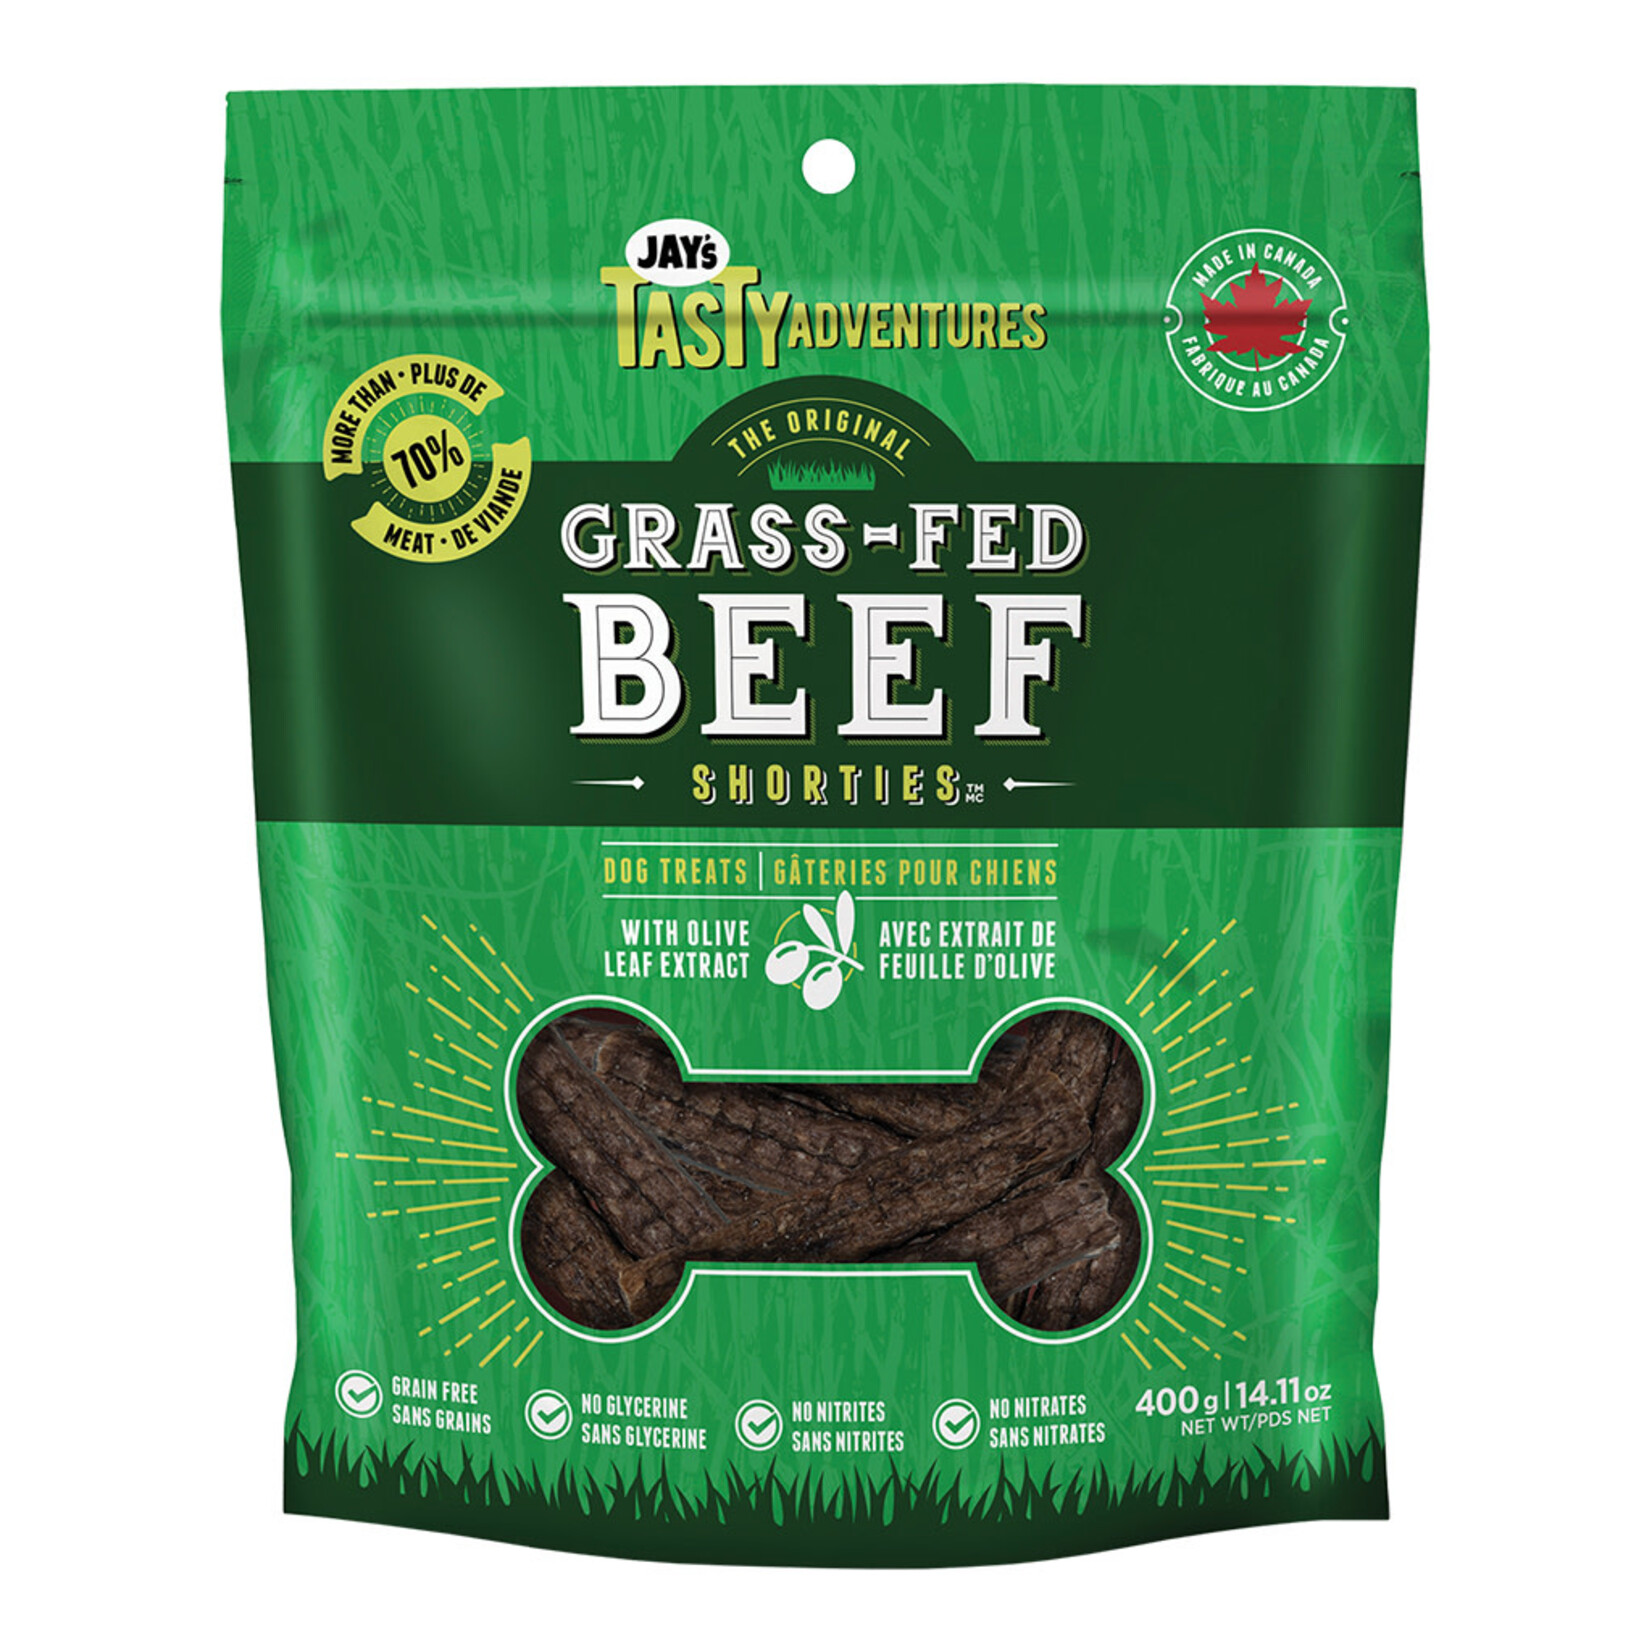 Jay's Grass-Fed Beef Shorties 400GM